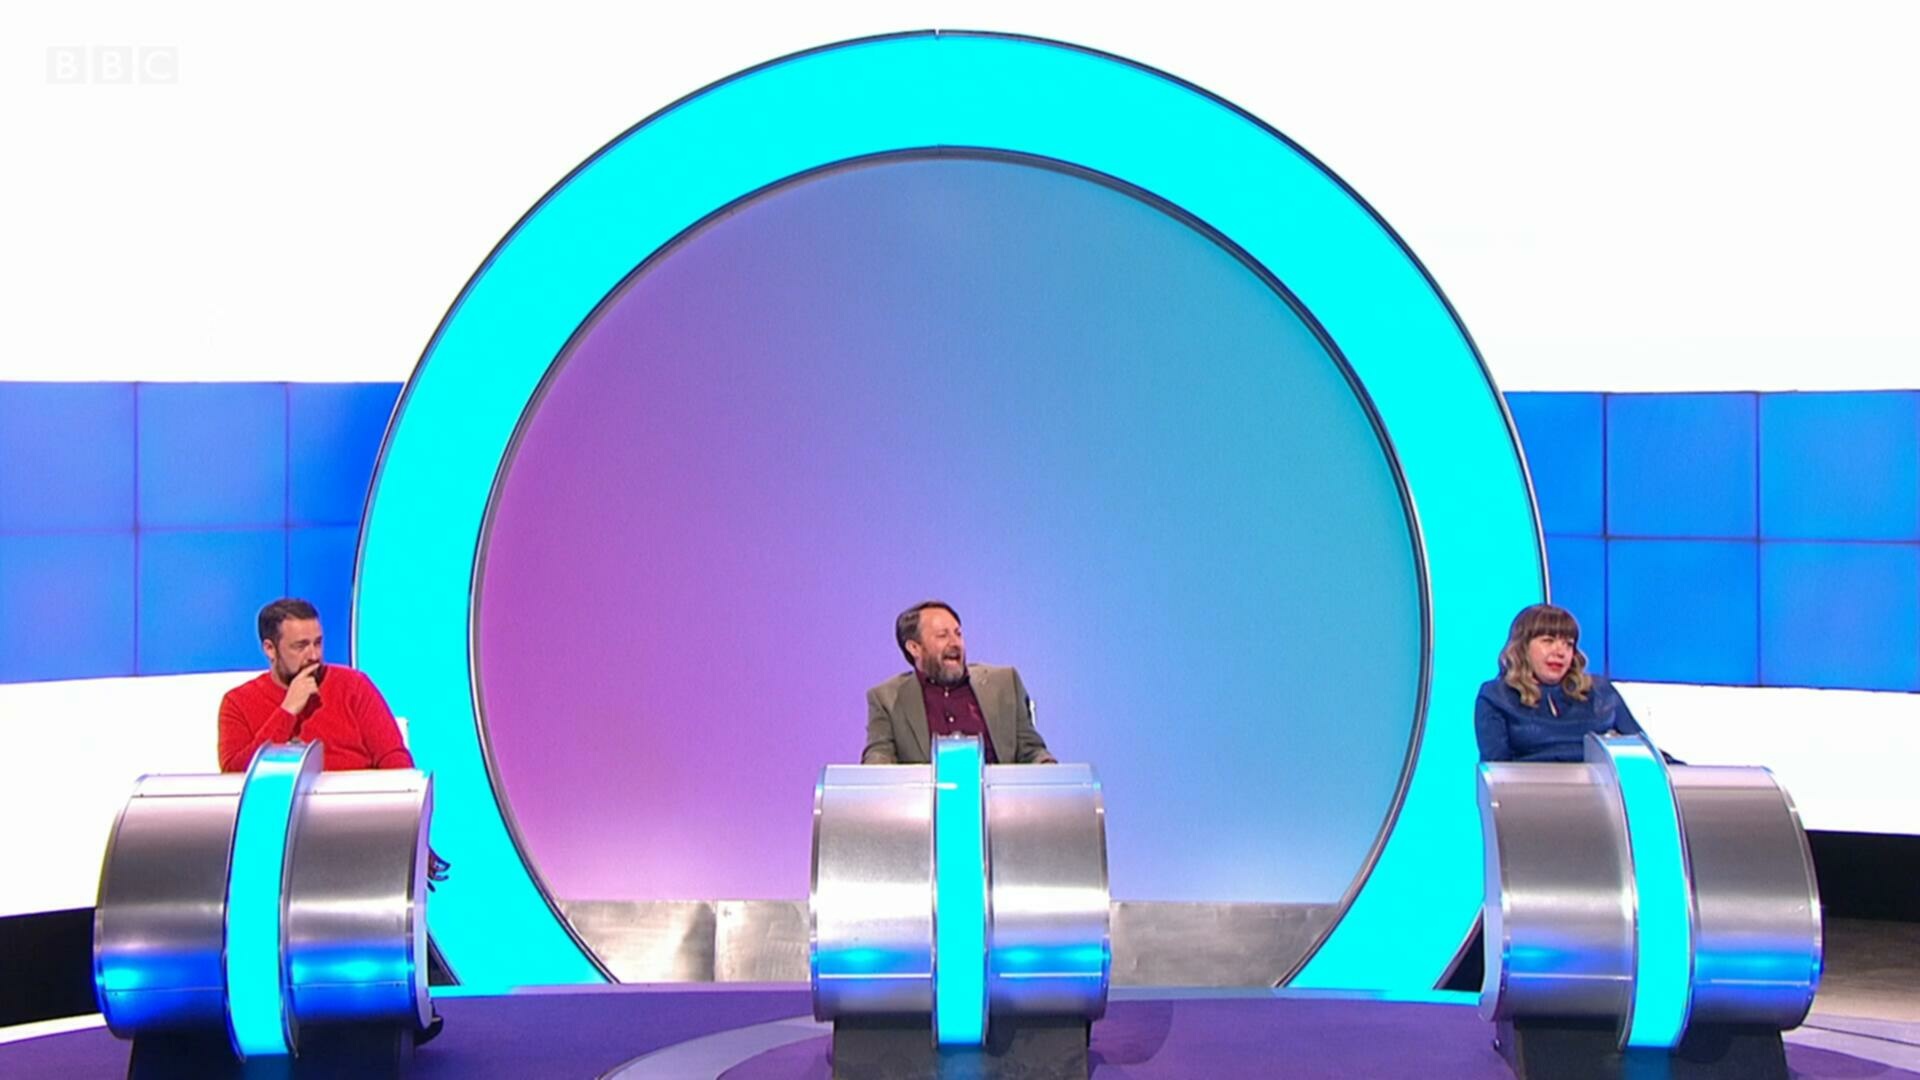 Would I Lie to You S15E03 Sophie Ellis Bextor Loyiso Gola Jason Manford and Briony May Williams 1080